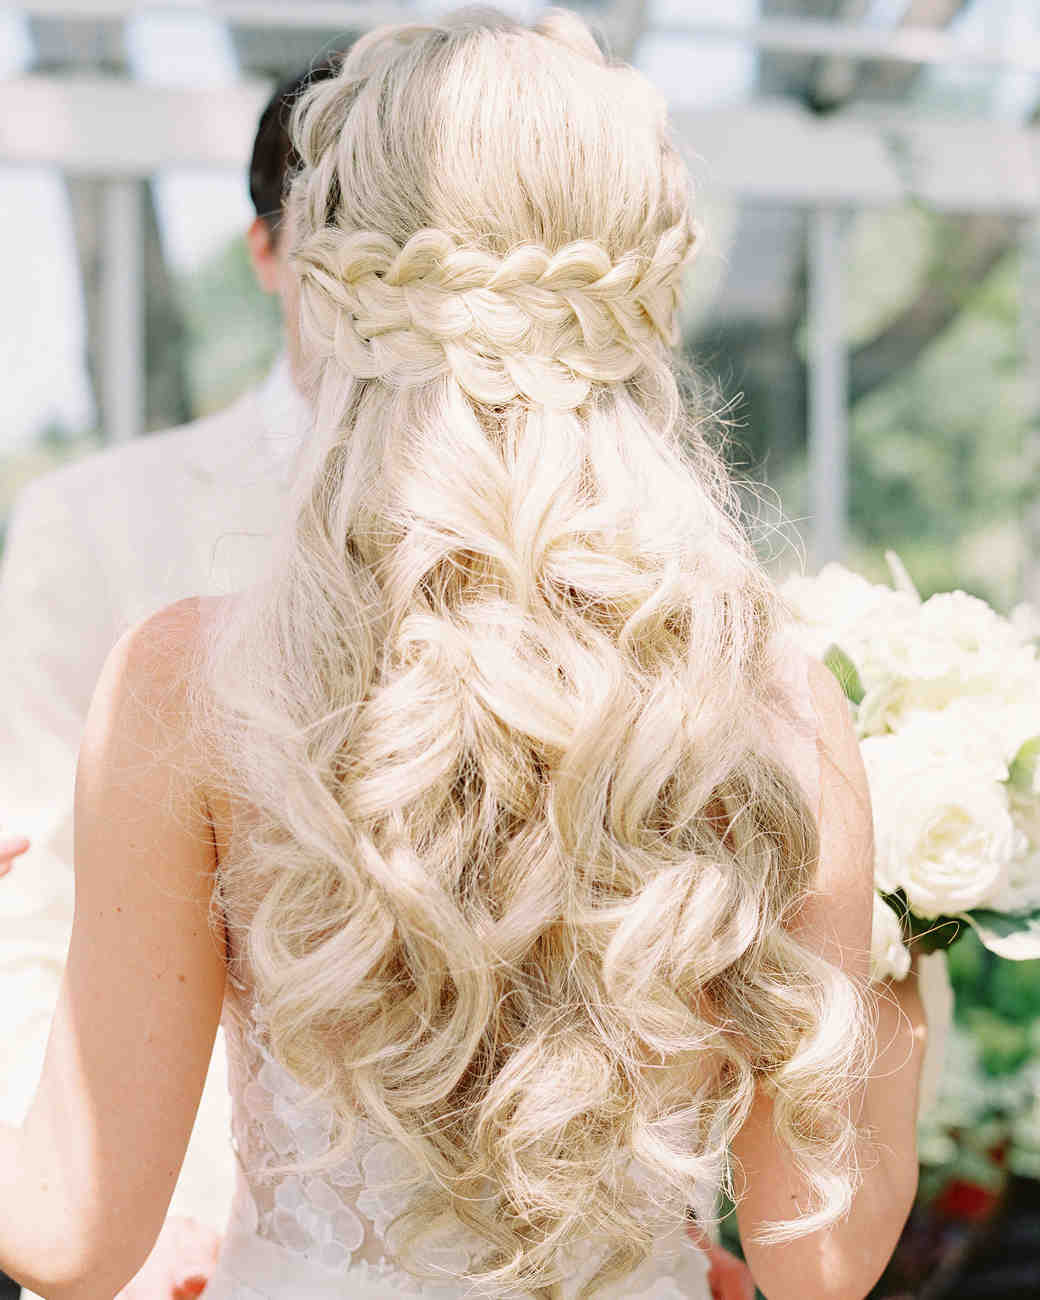 Wedding Hairstyles Down With Veil
 Braided Wedding Hairstyles With Veil